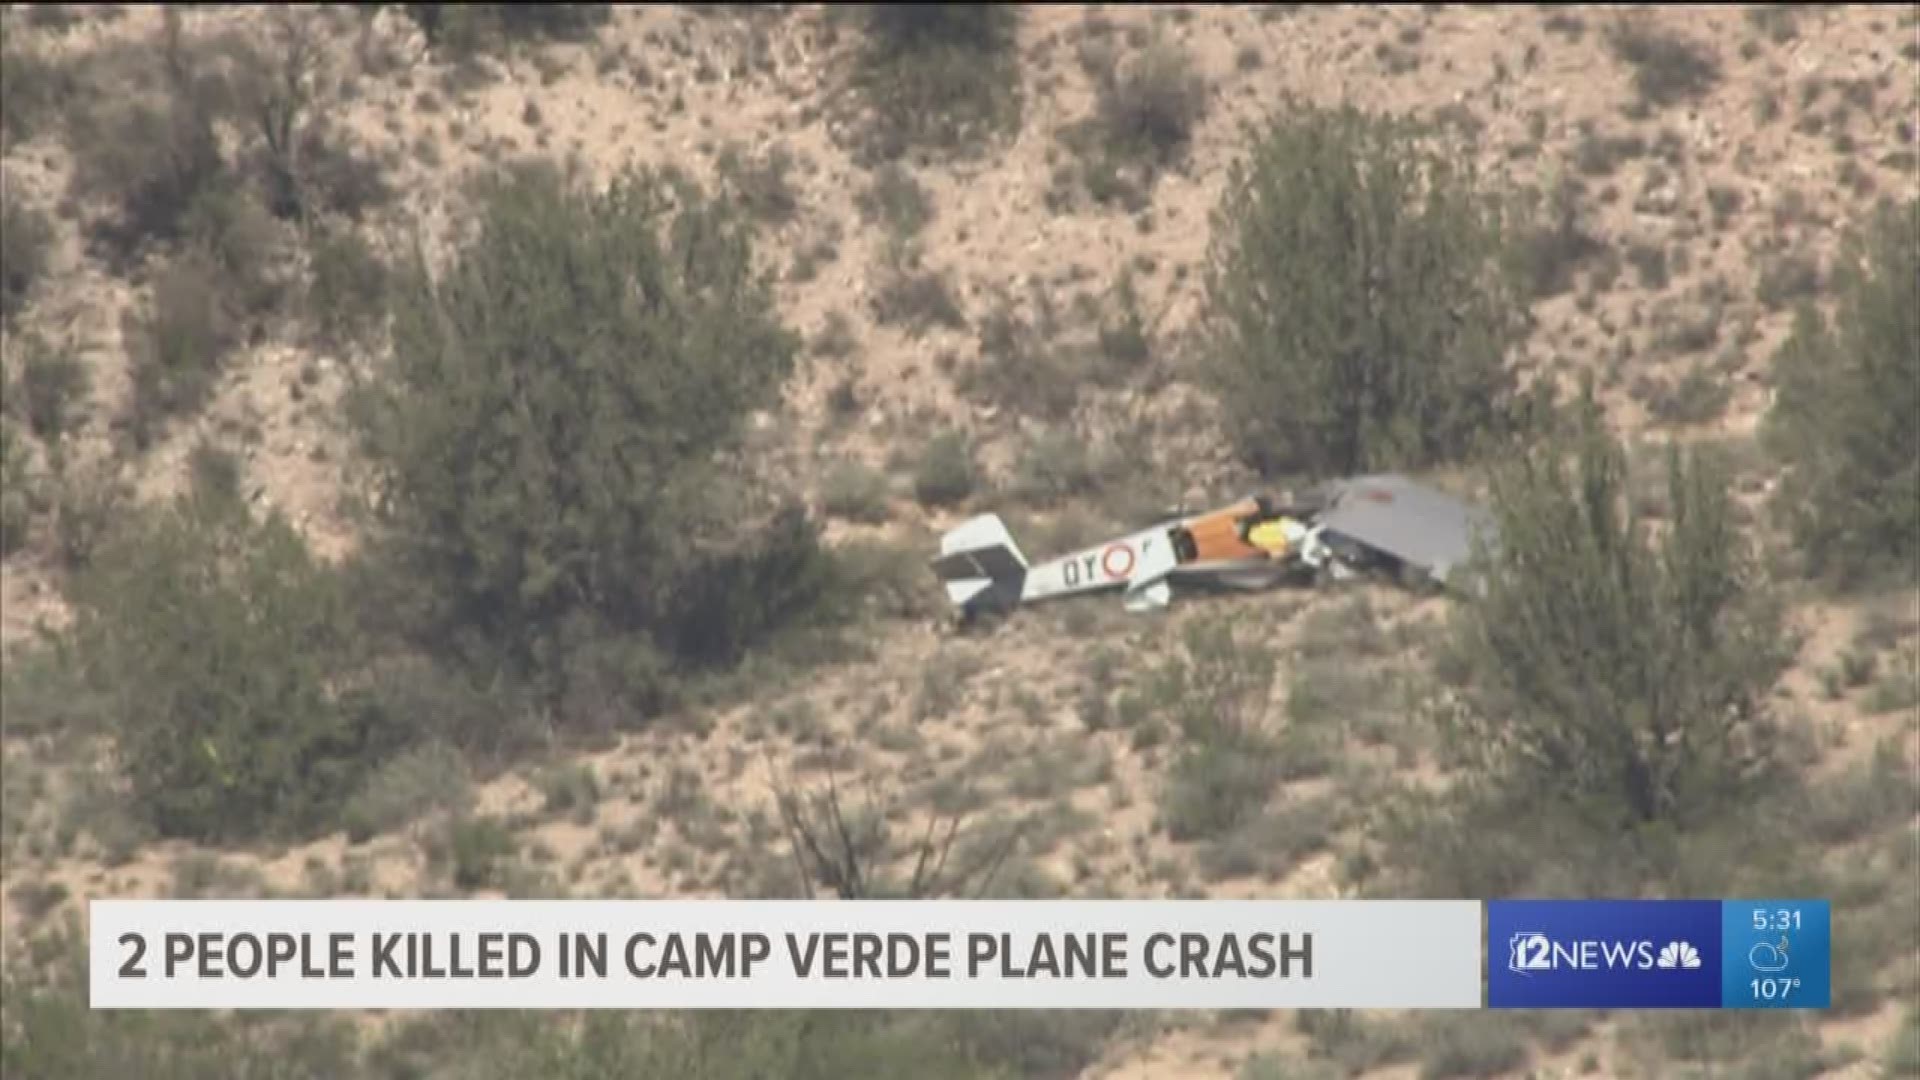 The Yavapai County Sheriff's Office confirmed Sunday that two men died in a home-built plane crash in Camp Verde and their bodies have been recovered.